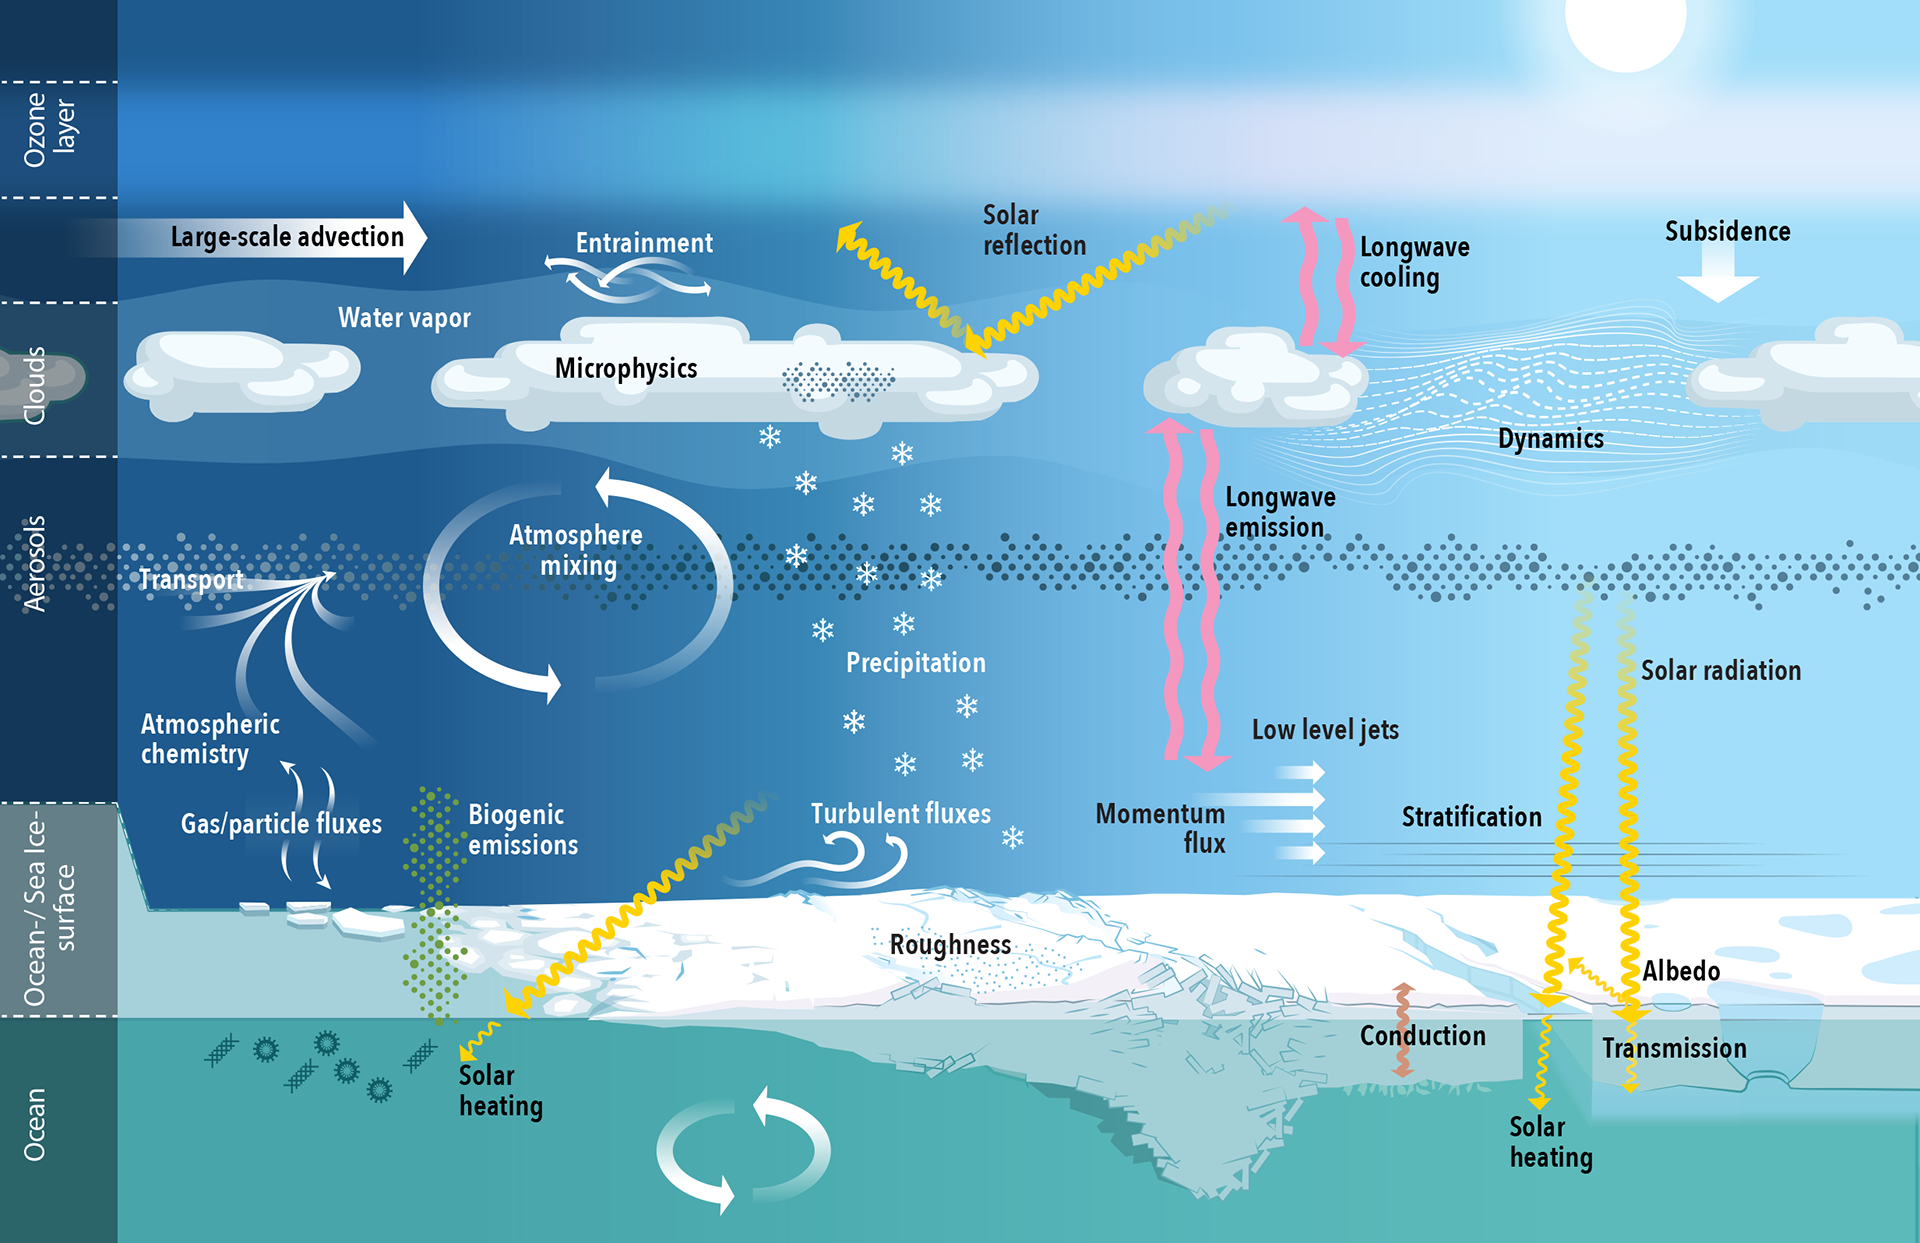 Atmospheric processes over the Central Arctic. Depicted are the primary zones and processes examined by the atmosphere team during the yearlong MOSAiC expedition that began in September 2019. MOSAiC = Multidisciplinary drifting Observatory for the Study of Arctic Climate.